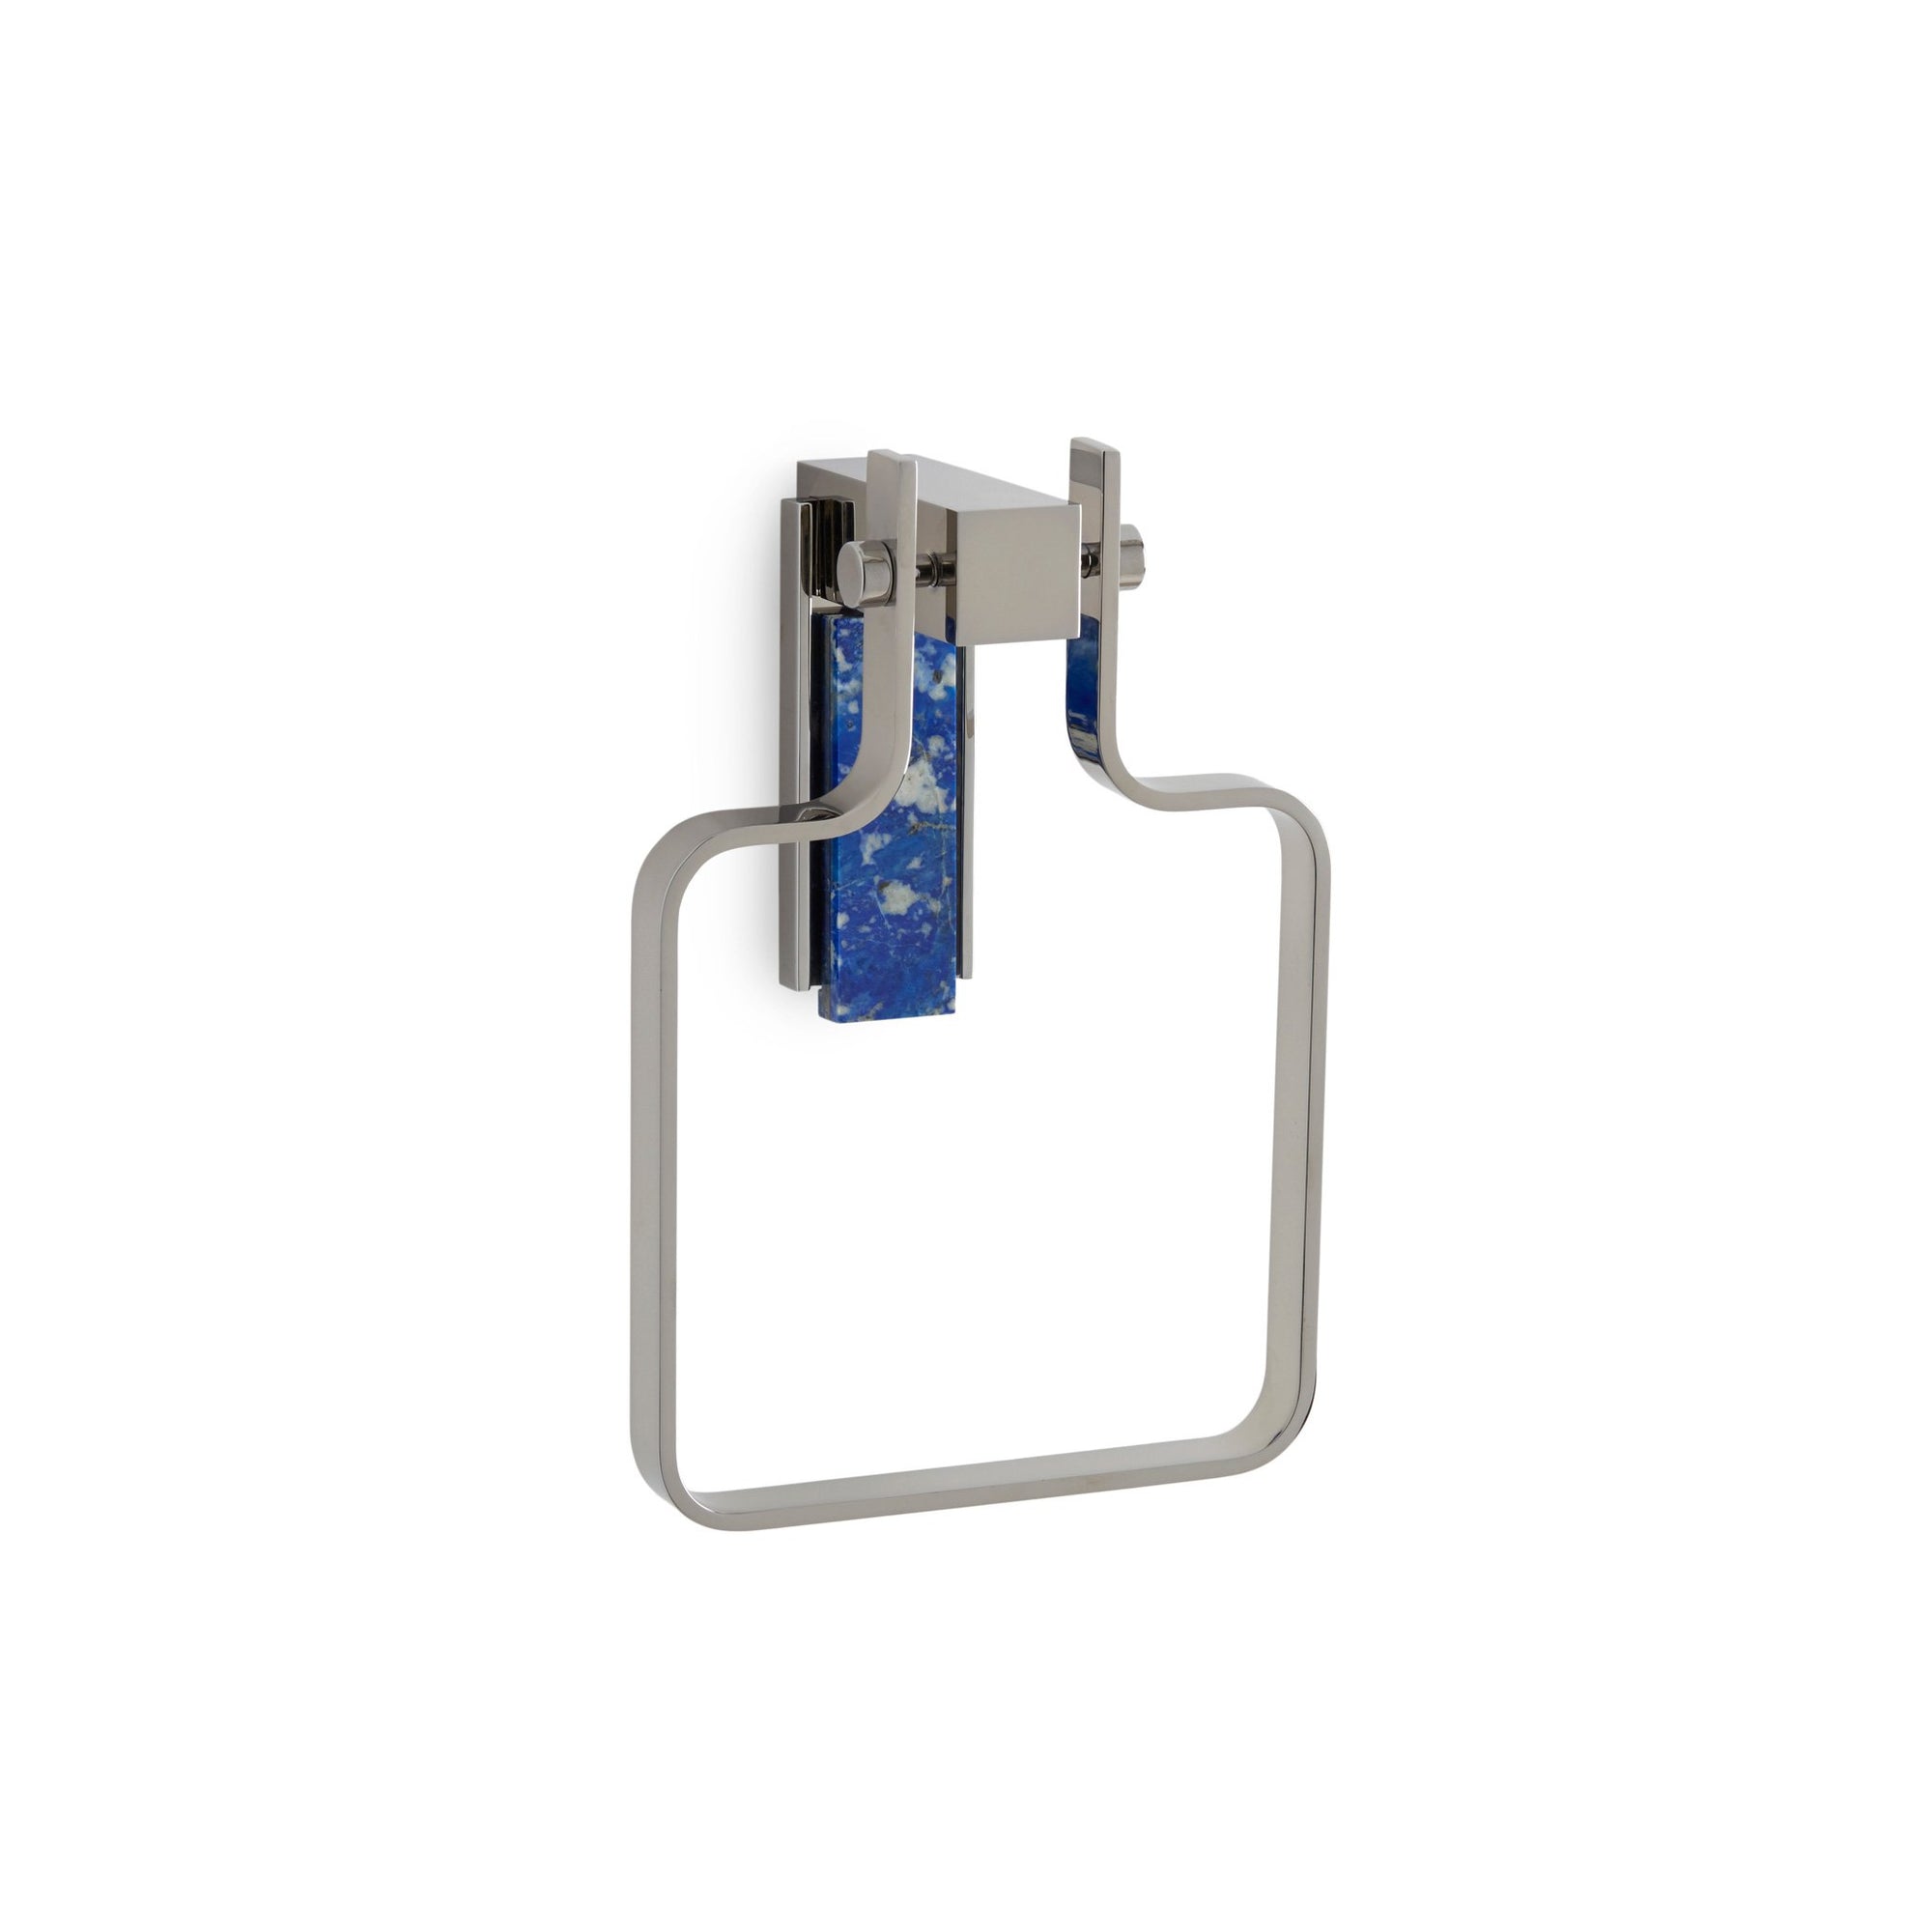 3456-LAPI-CP Sherle Wagner International Apollo Towel Ring with Lapis Lazuli insert in Polished Chrome metal finish